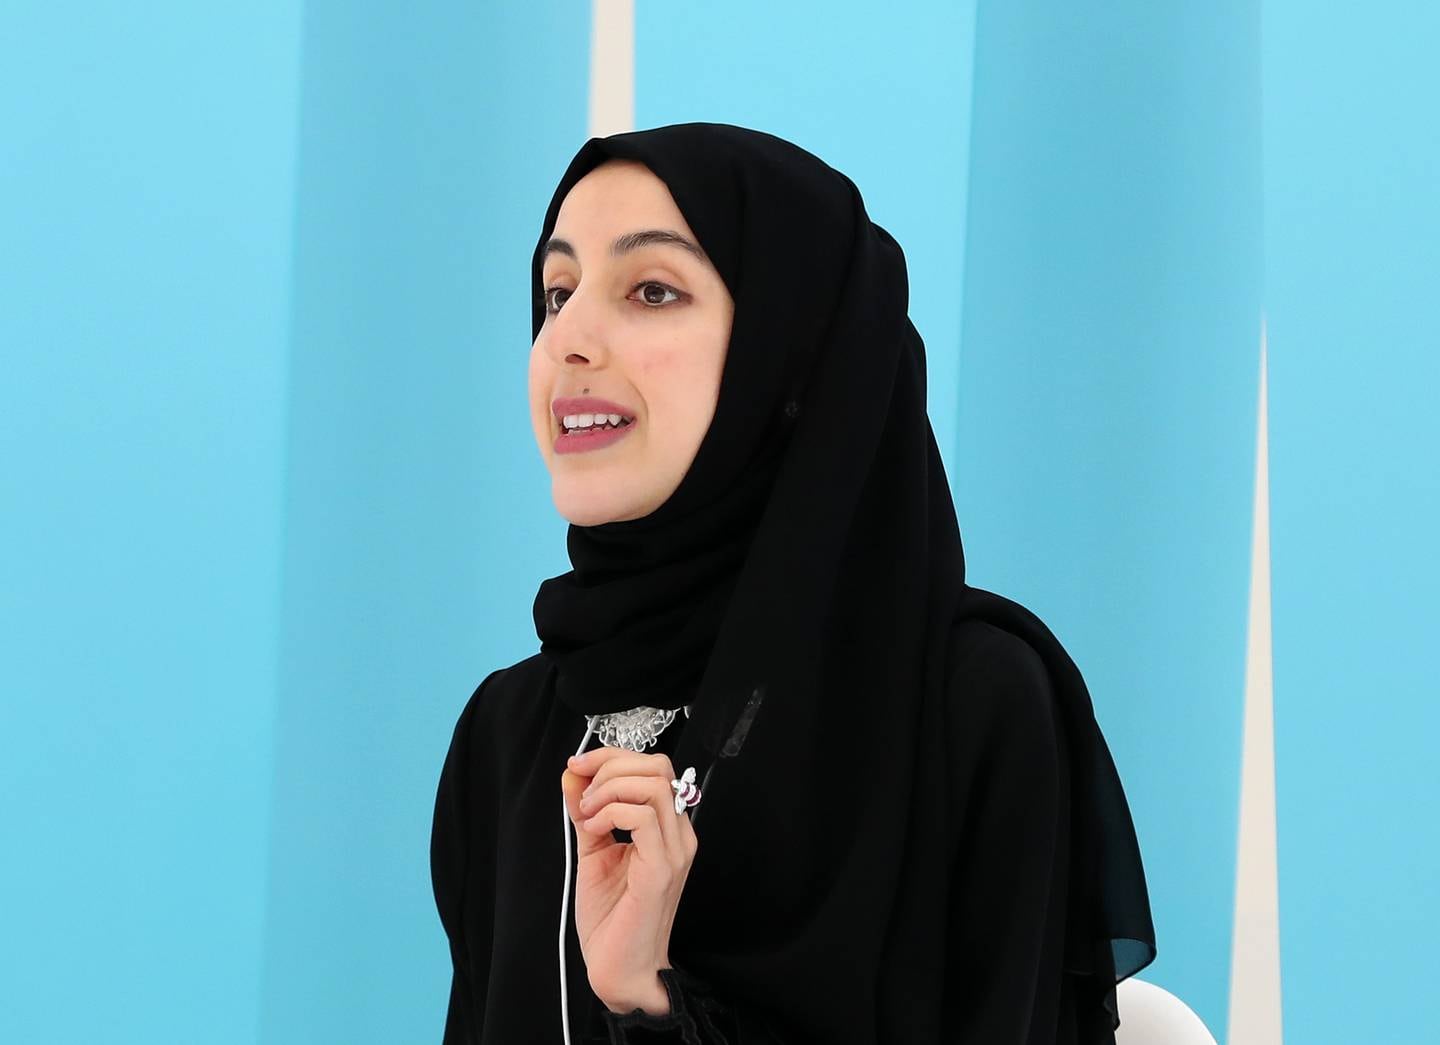 Shamma bint Suhail Al Mazrui, Minister of State for Youth, speaks at the World Government Summit Dialogue at The Museum of the Future, Dubai. Chris Whiteoak / The National